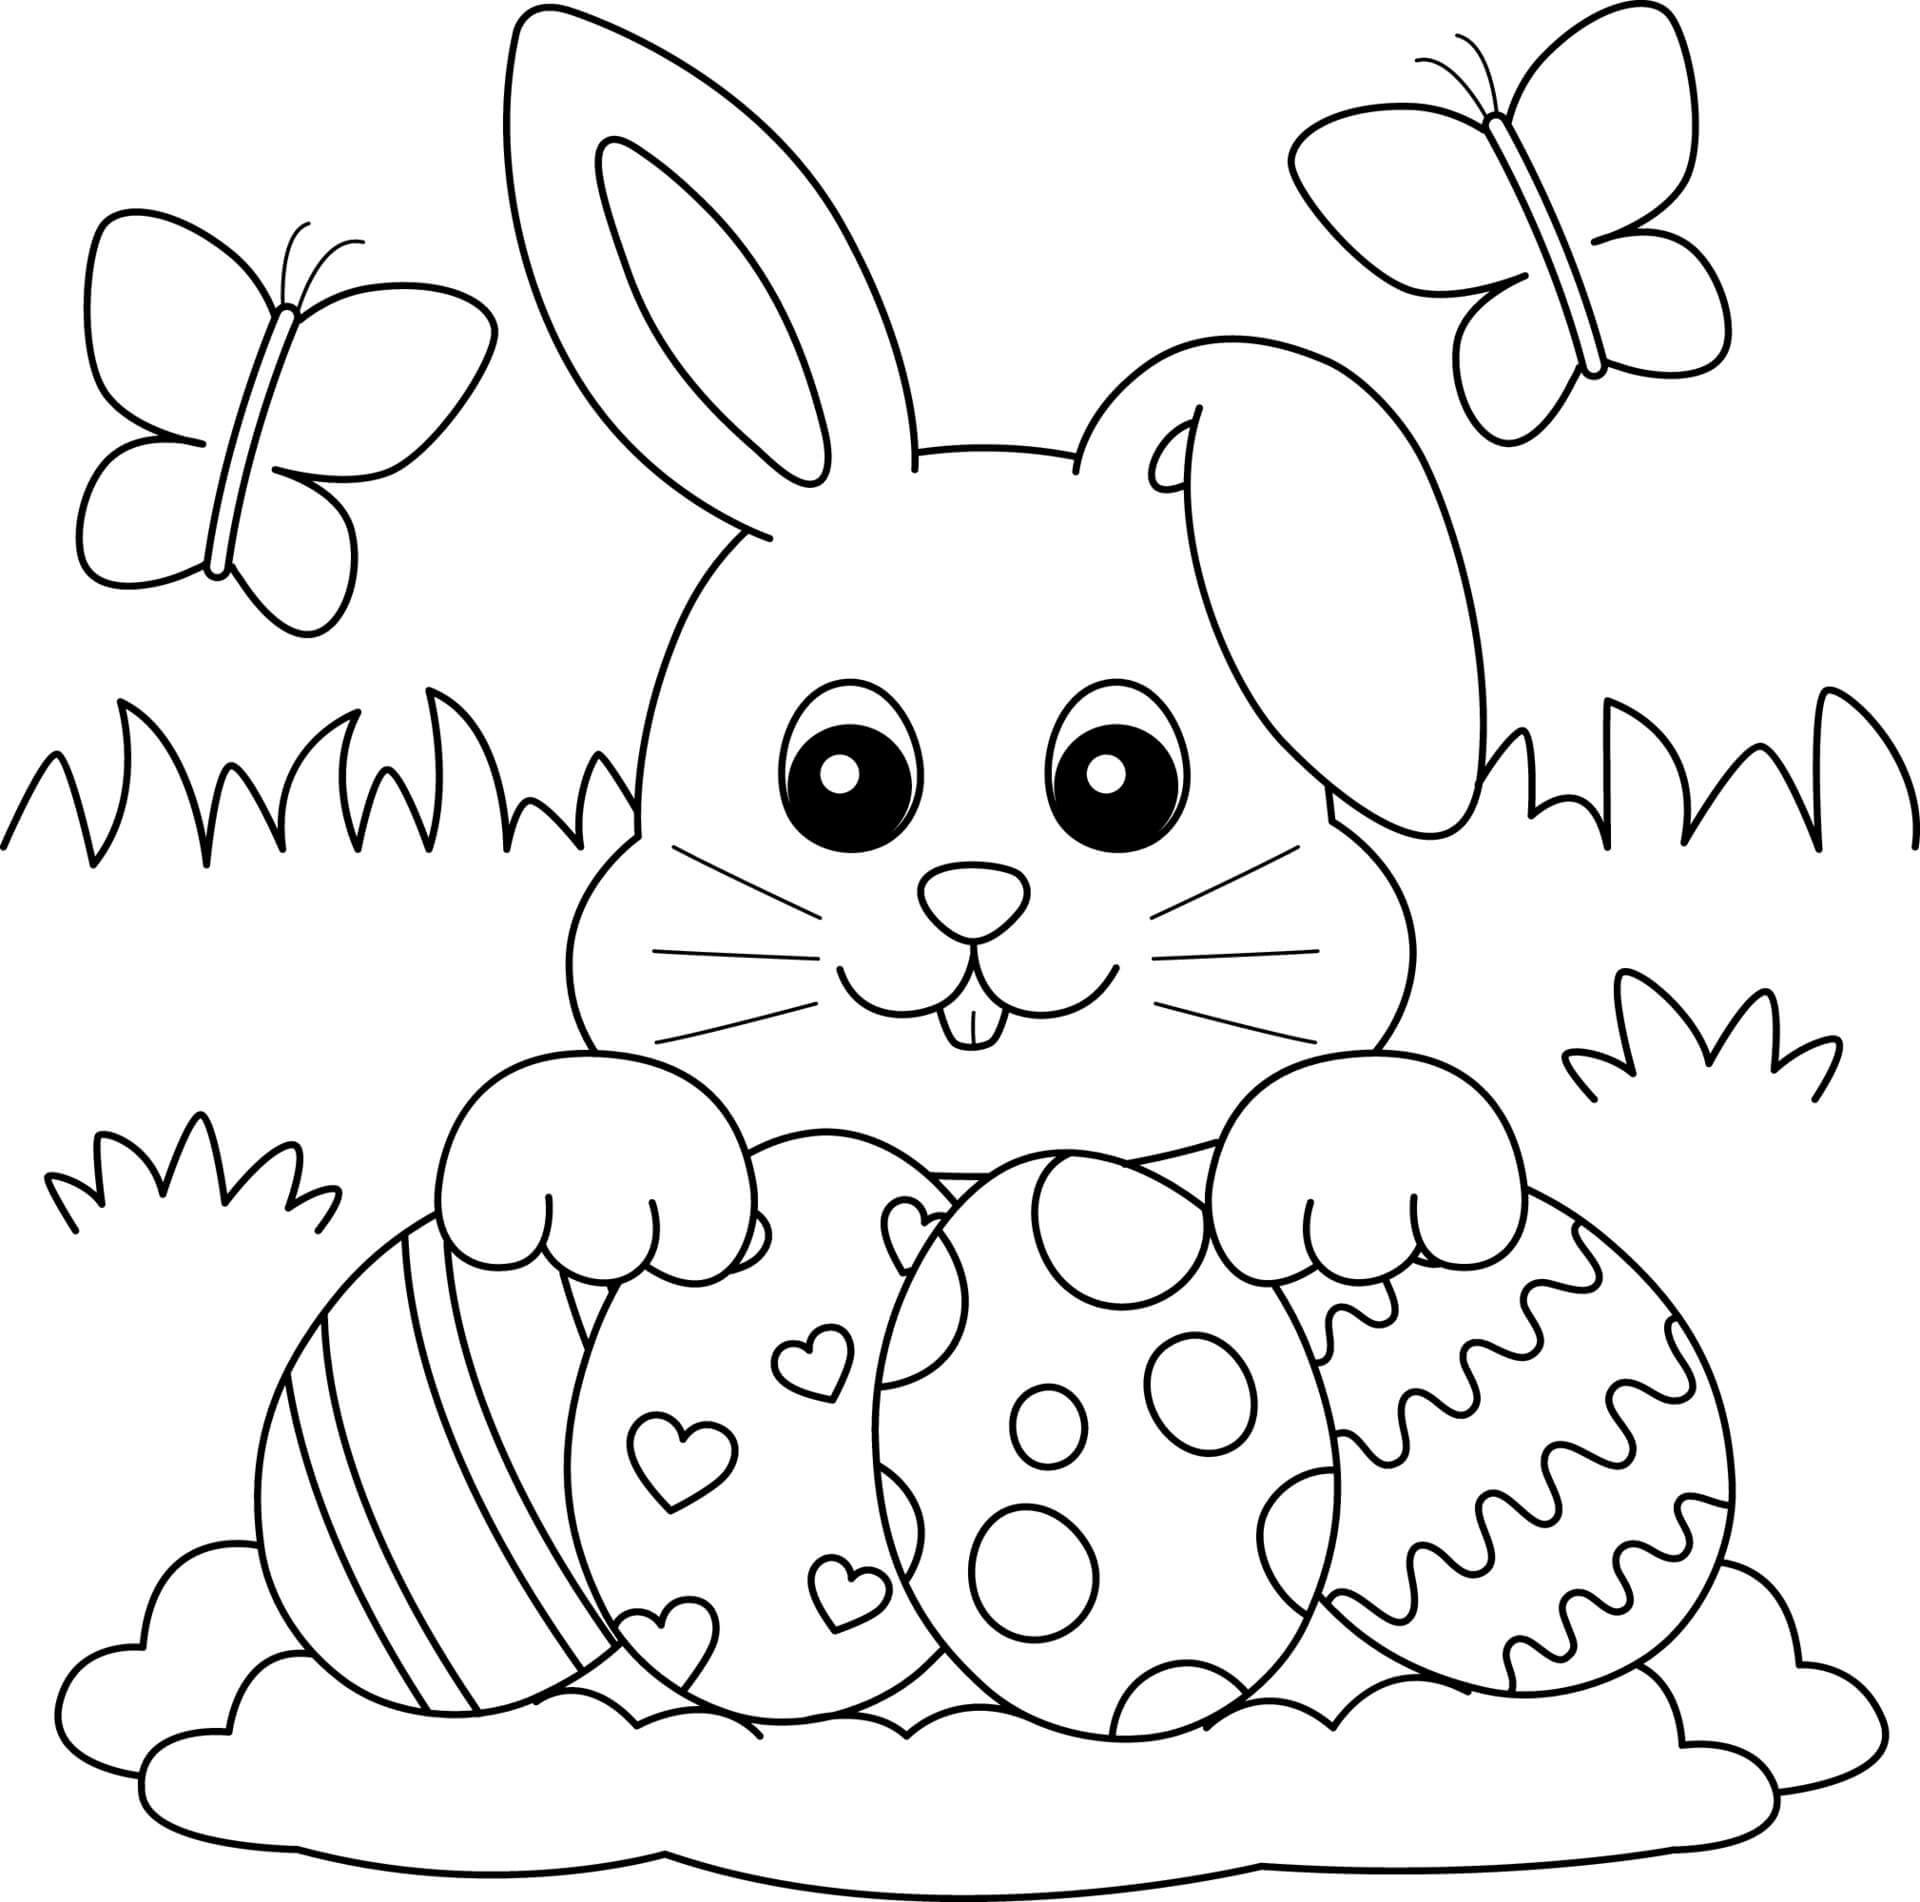 Printable Easter Coloring Pages